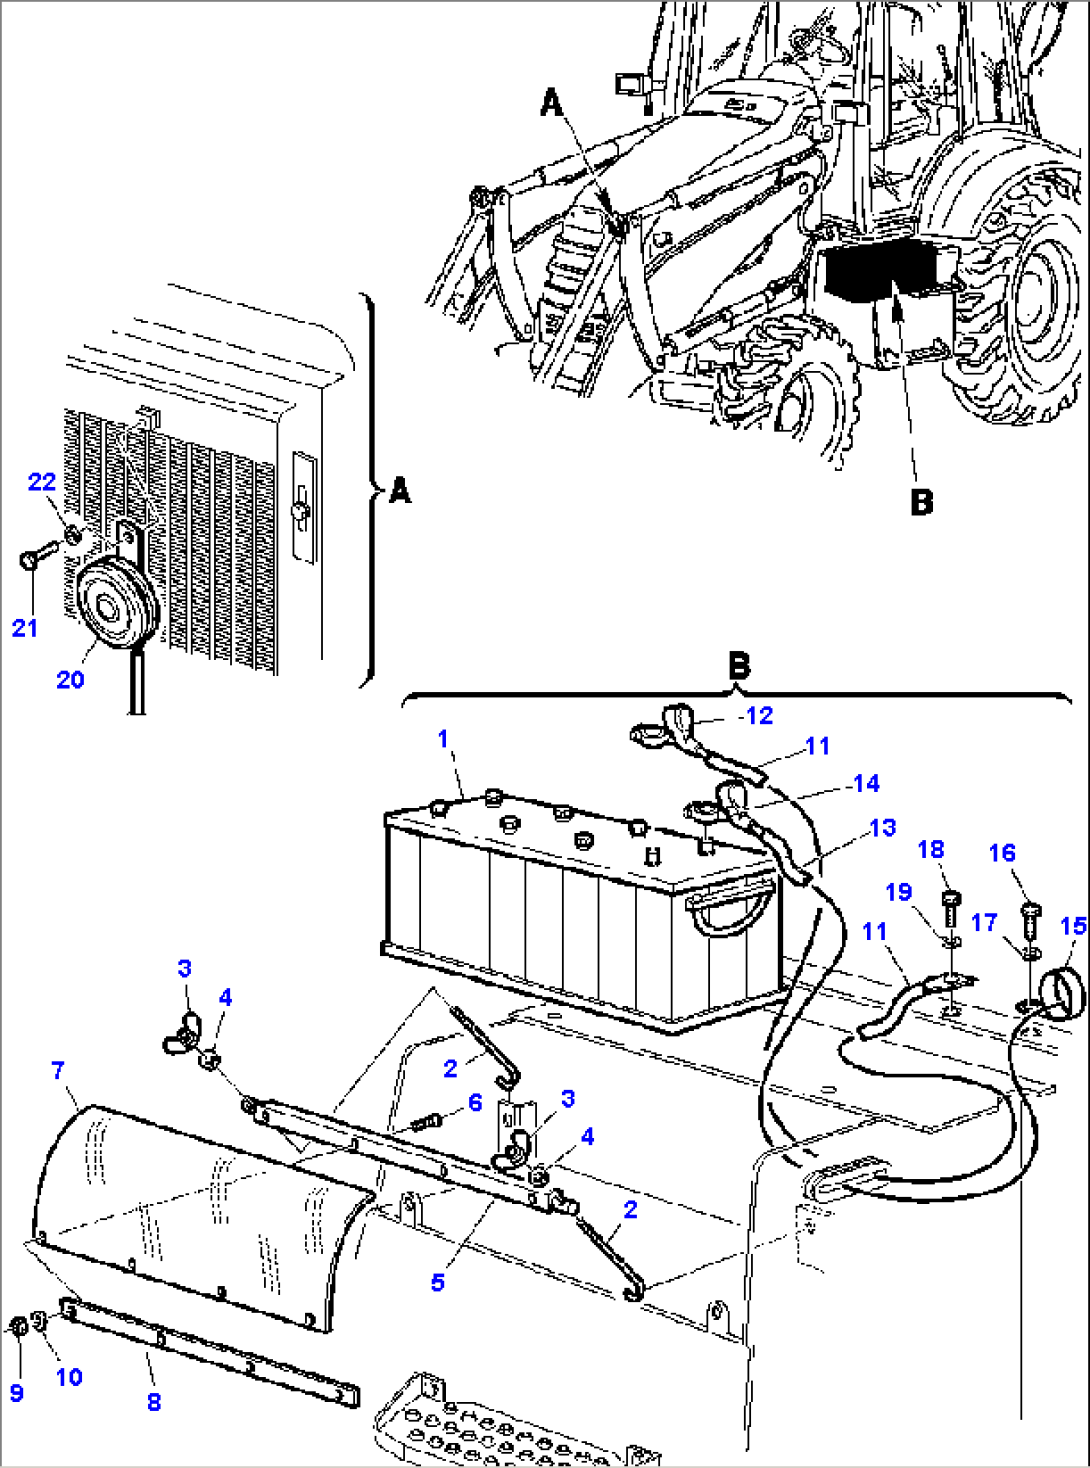 FIG. E1520-02A0 ELECTRICAL SYSTEM - BATTERY AND HORN